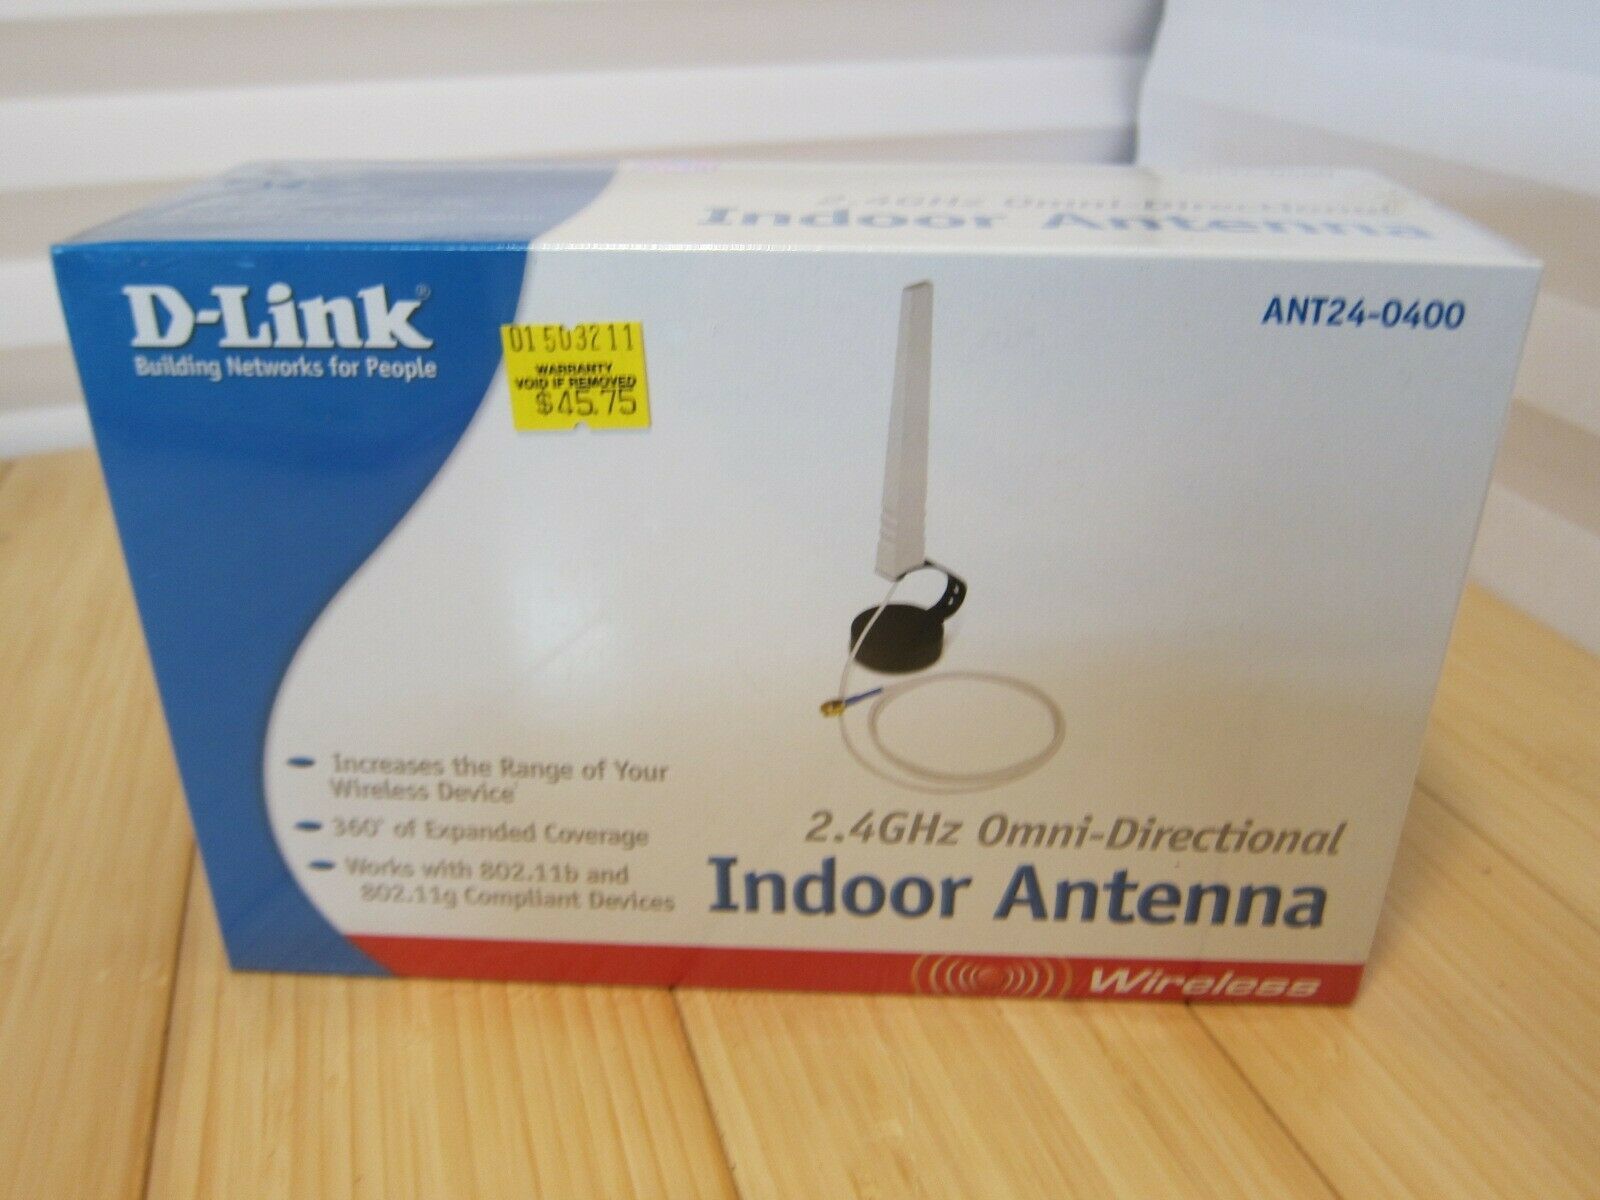 NEW D-Link ANT24-0700 Omni Directional Antenna - $23.36